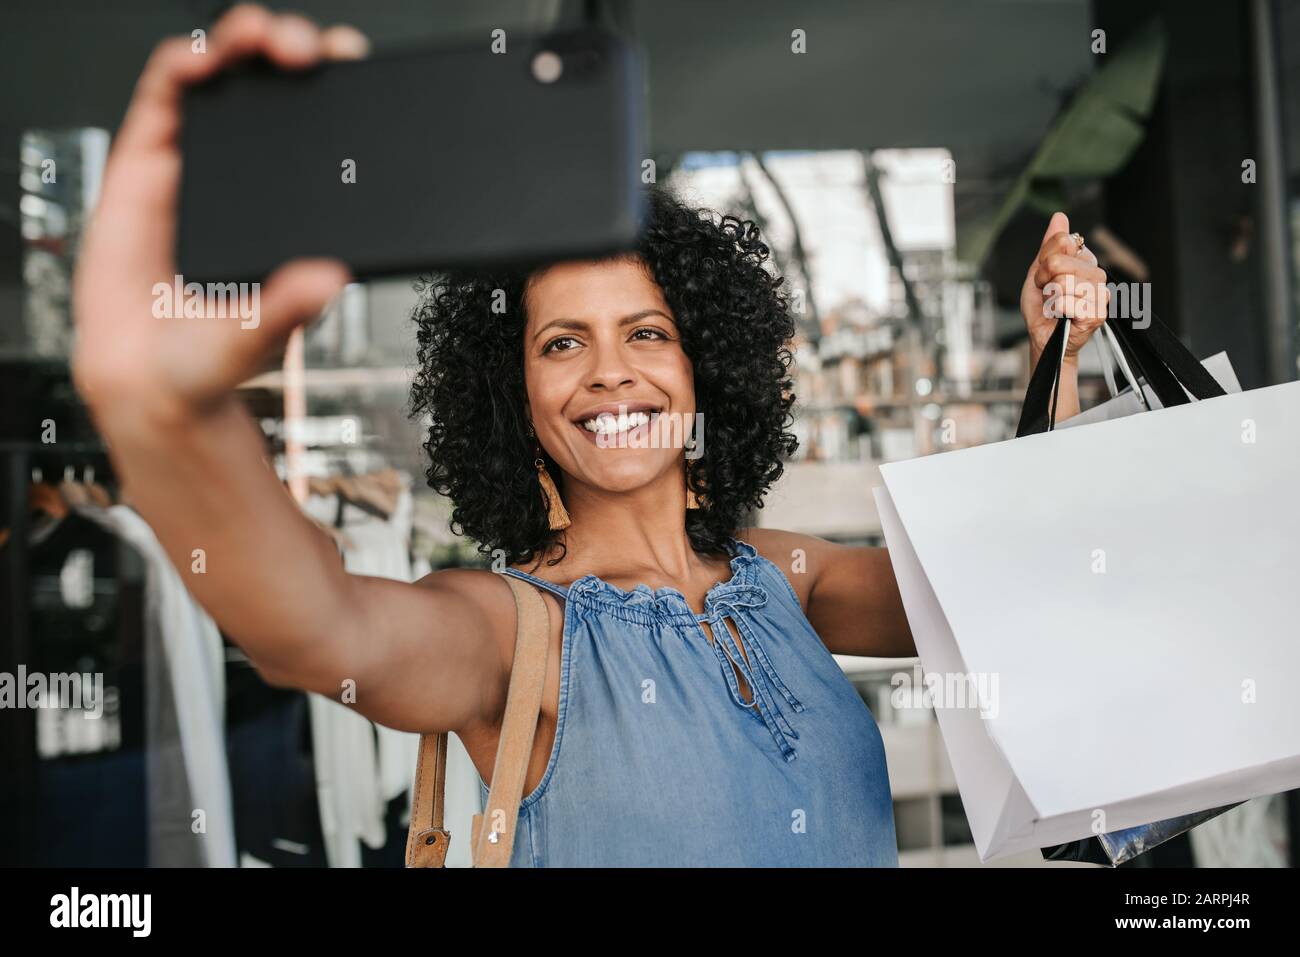 Smiling young woman taking selfies while out shopping Stock Photo